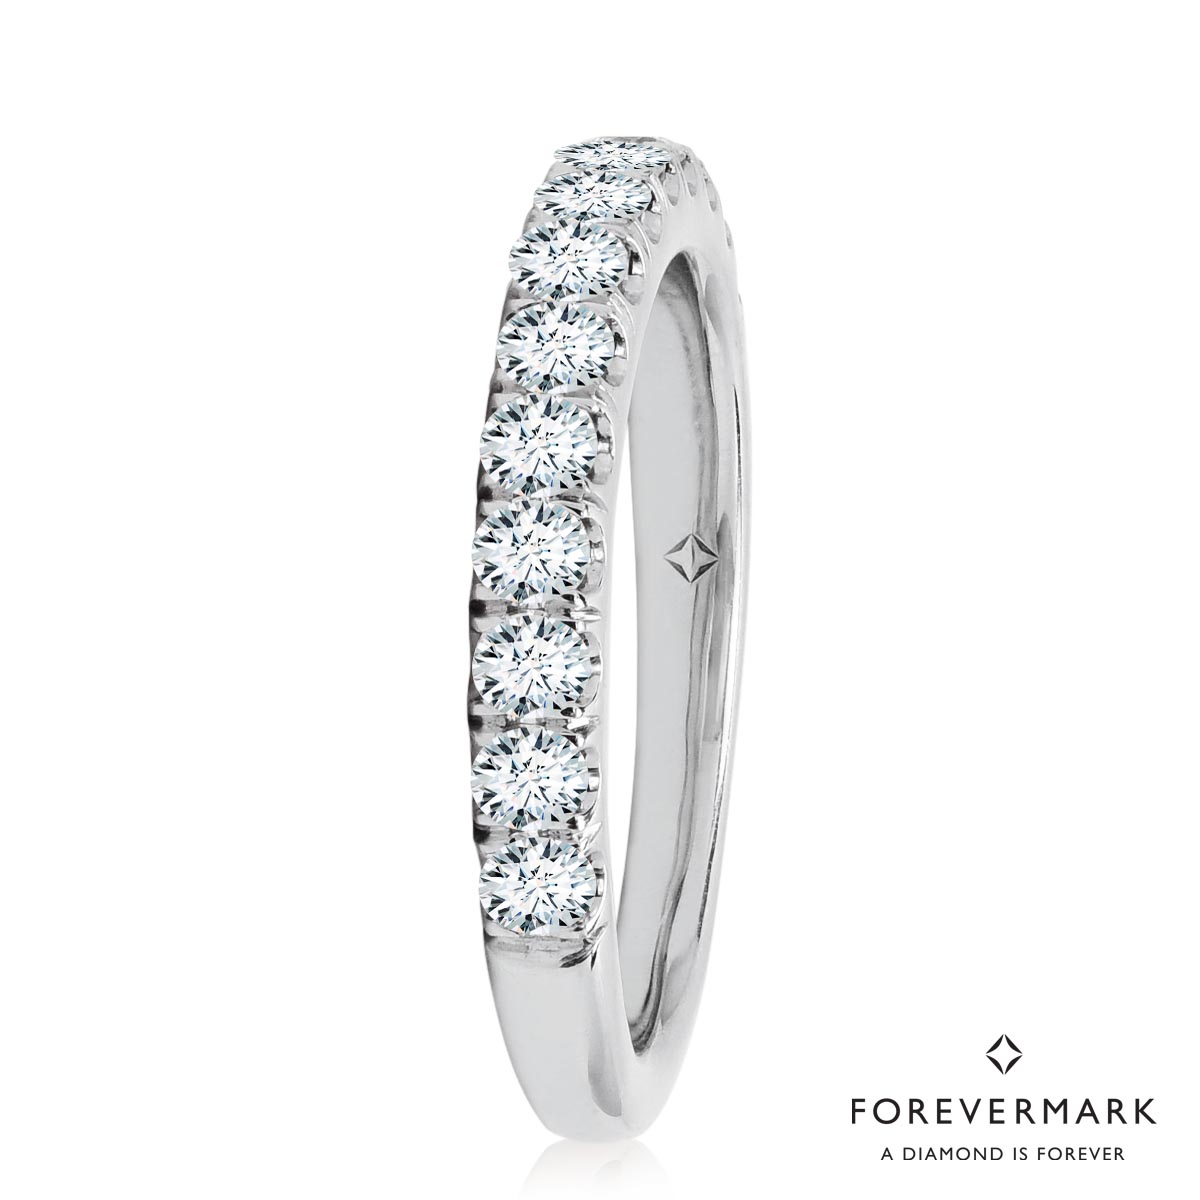 De Beers Forevermark Petite Diamond Wedding Band in 18kt White Gold (3/4ct tw)